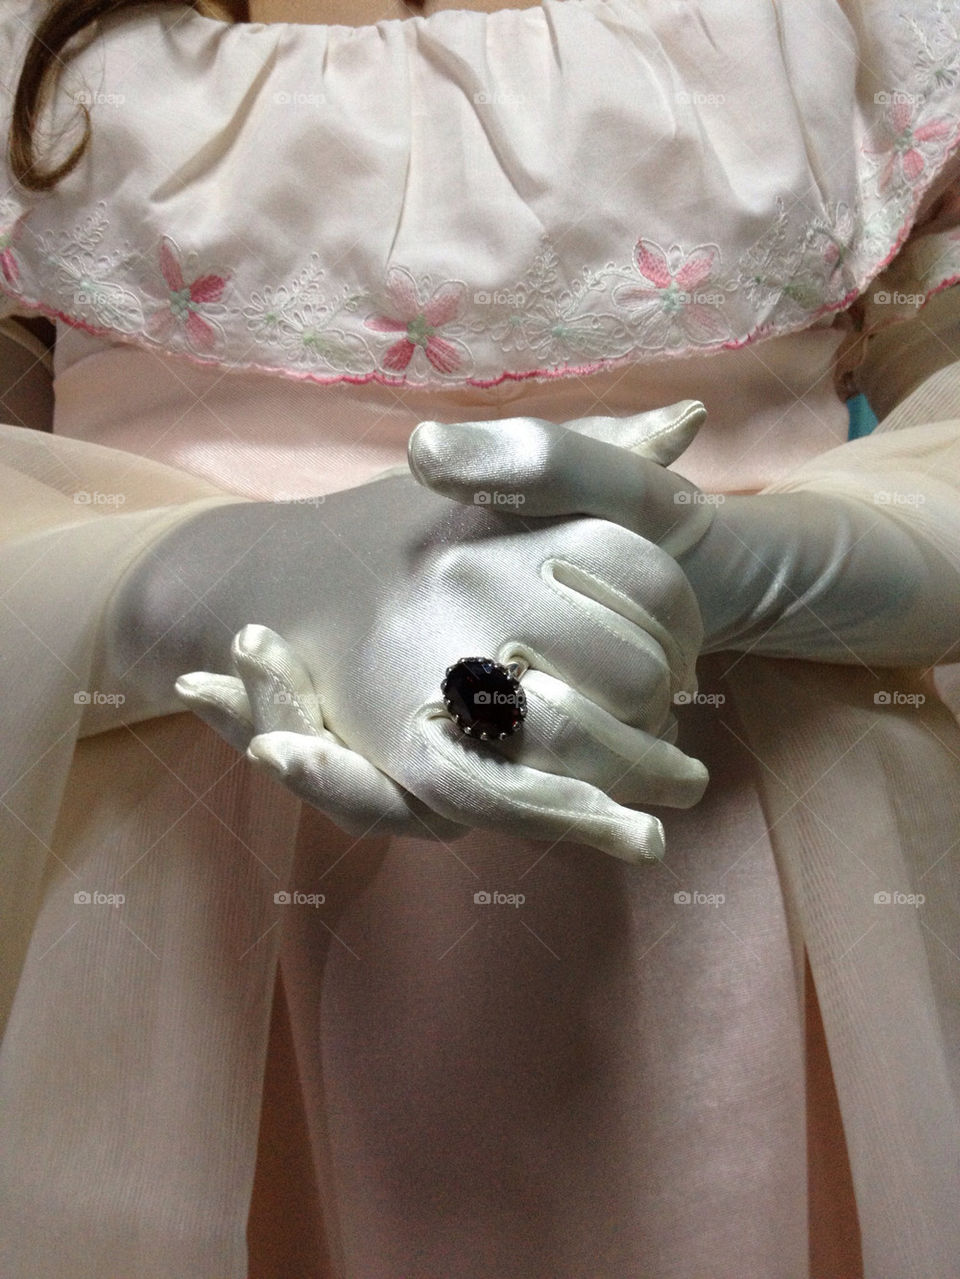 Hands  with white gloves and ring